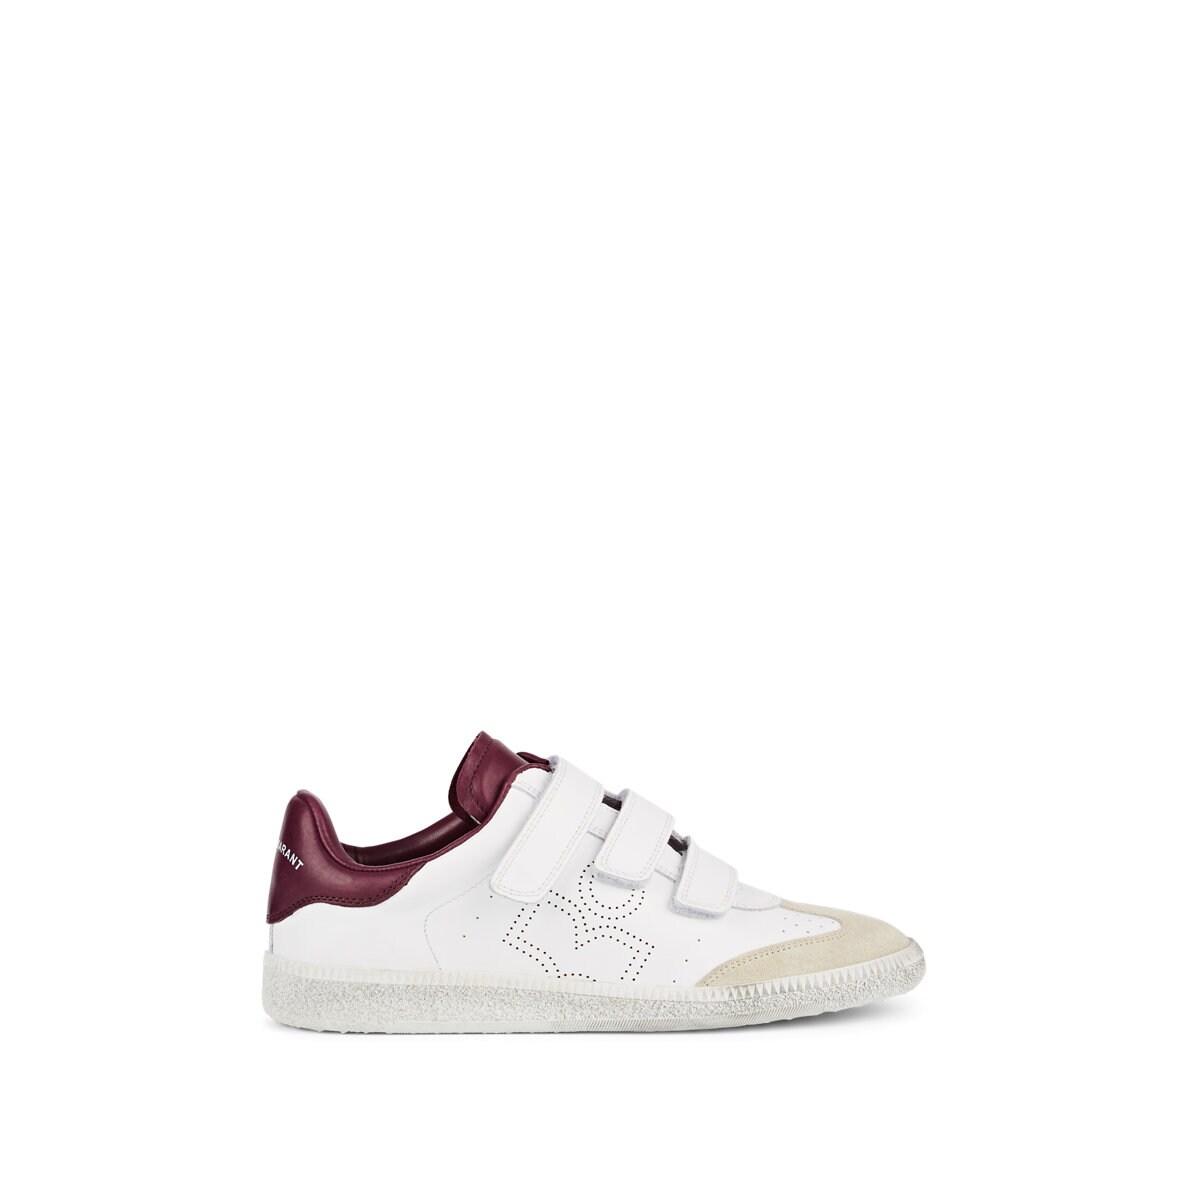 Isabel Marant Beth Leather Sneakers in Violet (Purple) - Lyst